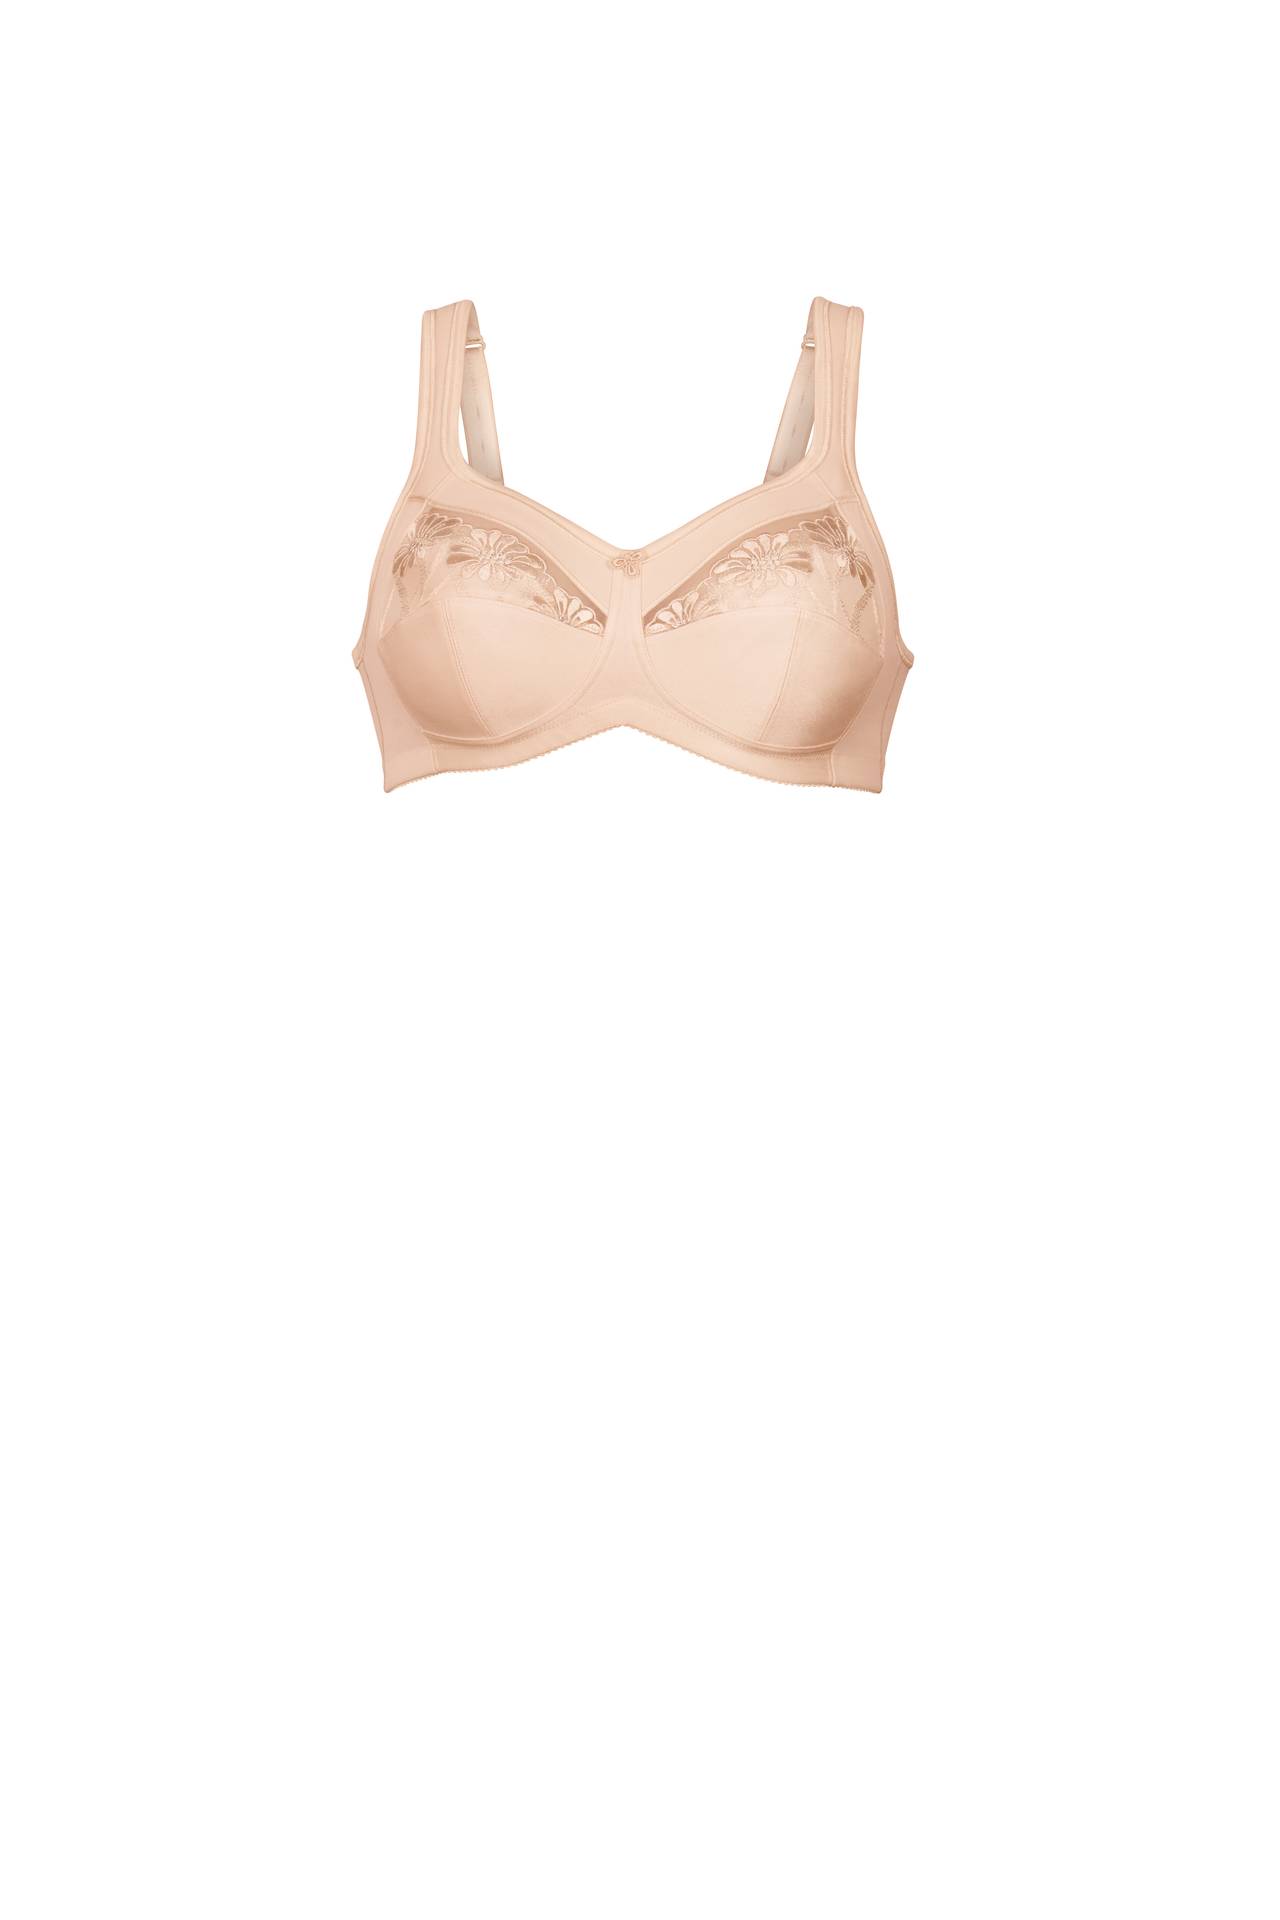 SALE* Mastectomy Bra 'Floral Chic Moulded Wire Free' Grey/Rose